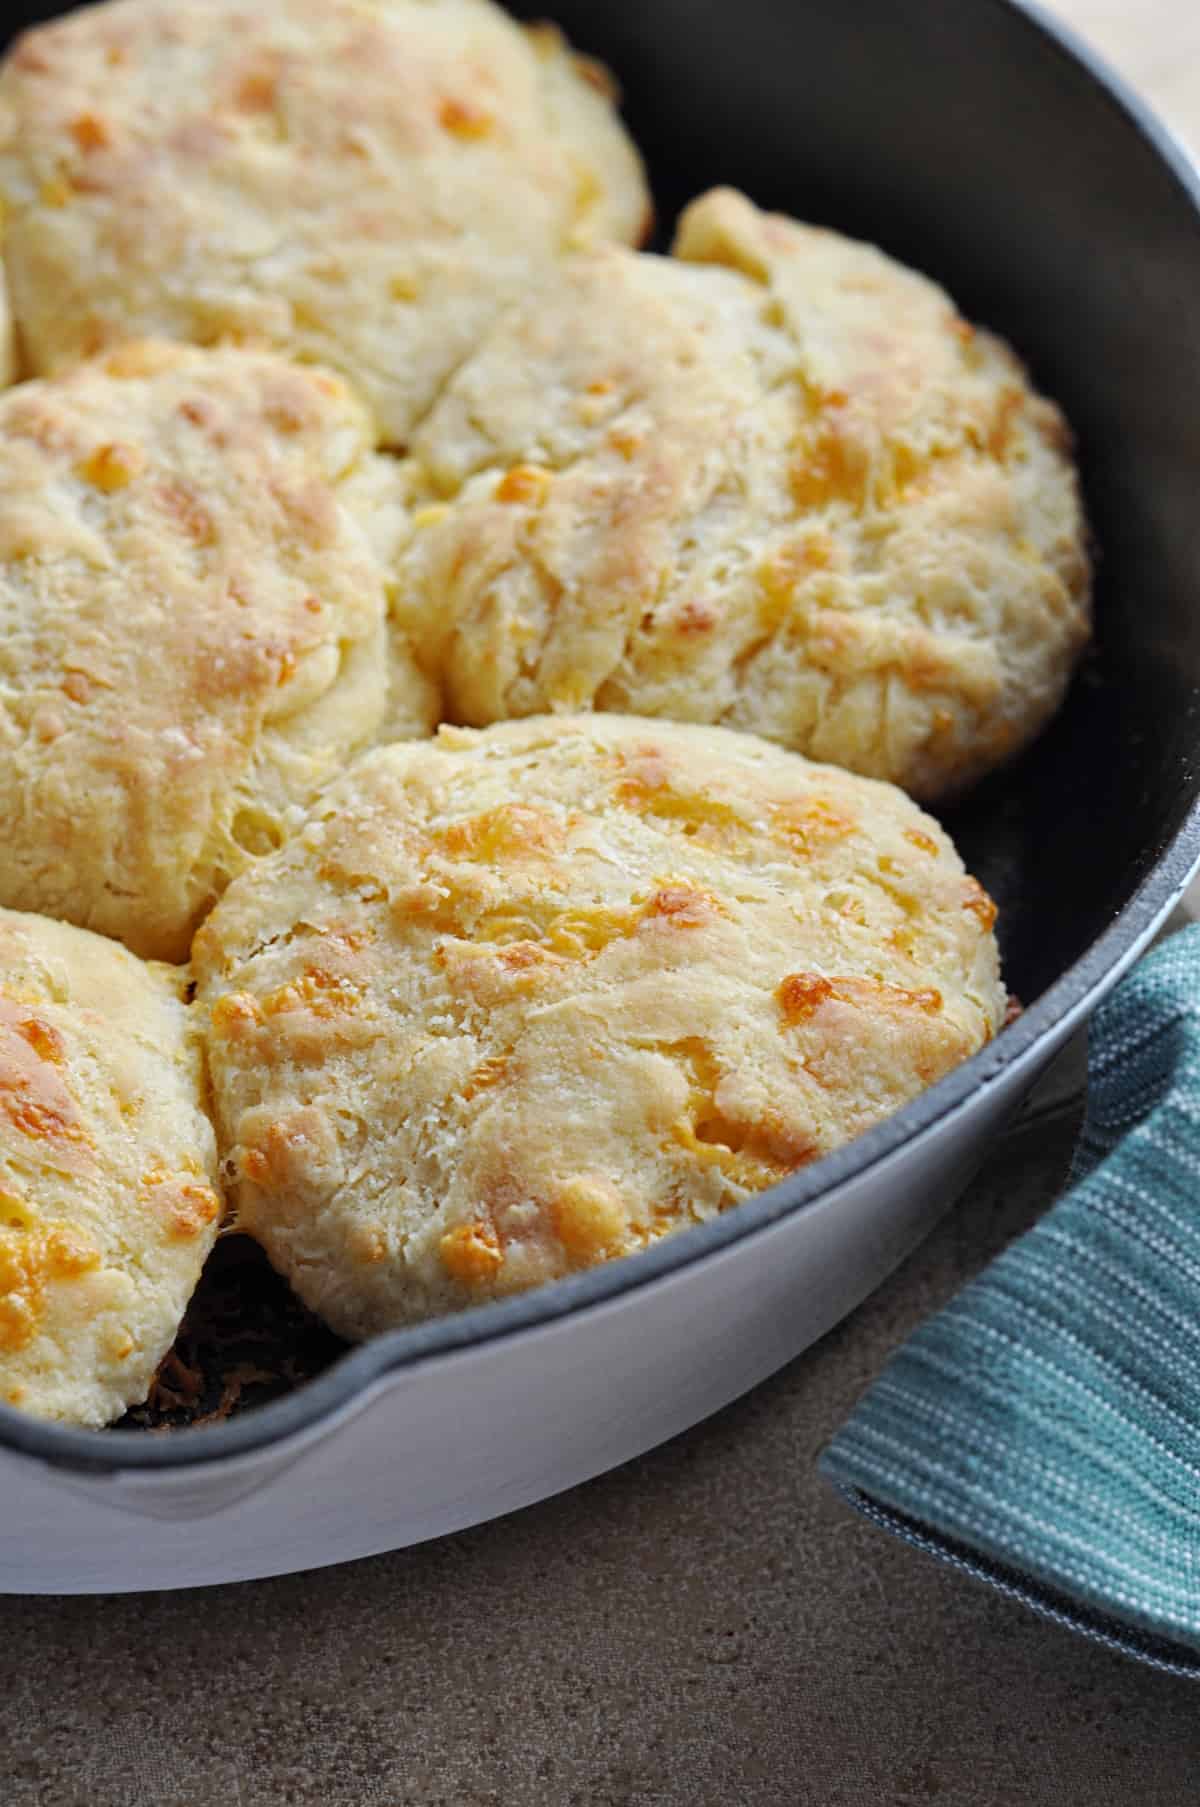 Cheddar Biscuit Recipe (Easy Cheese Biscuits) - Savory With Soul